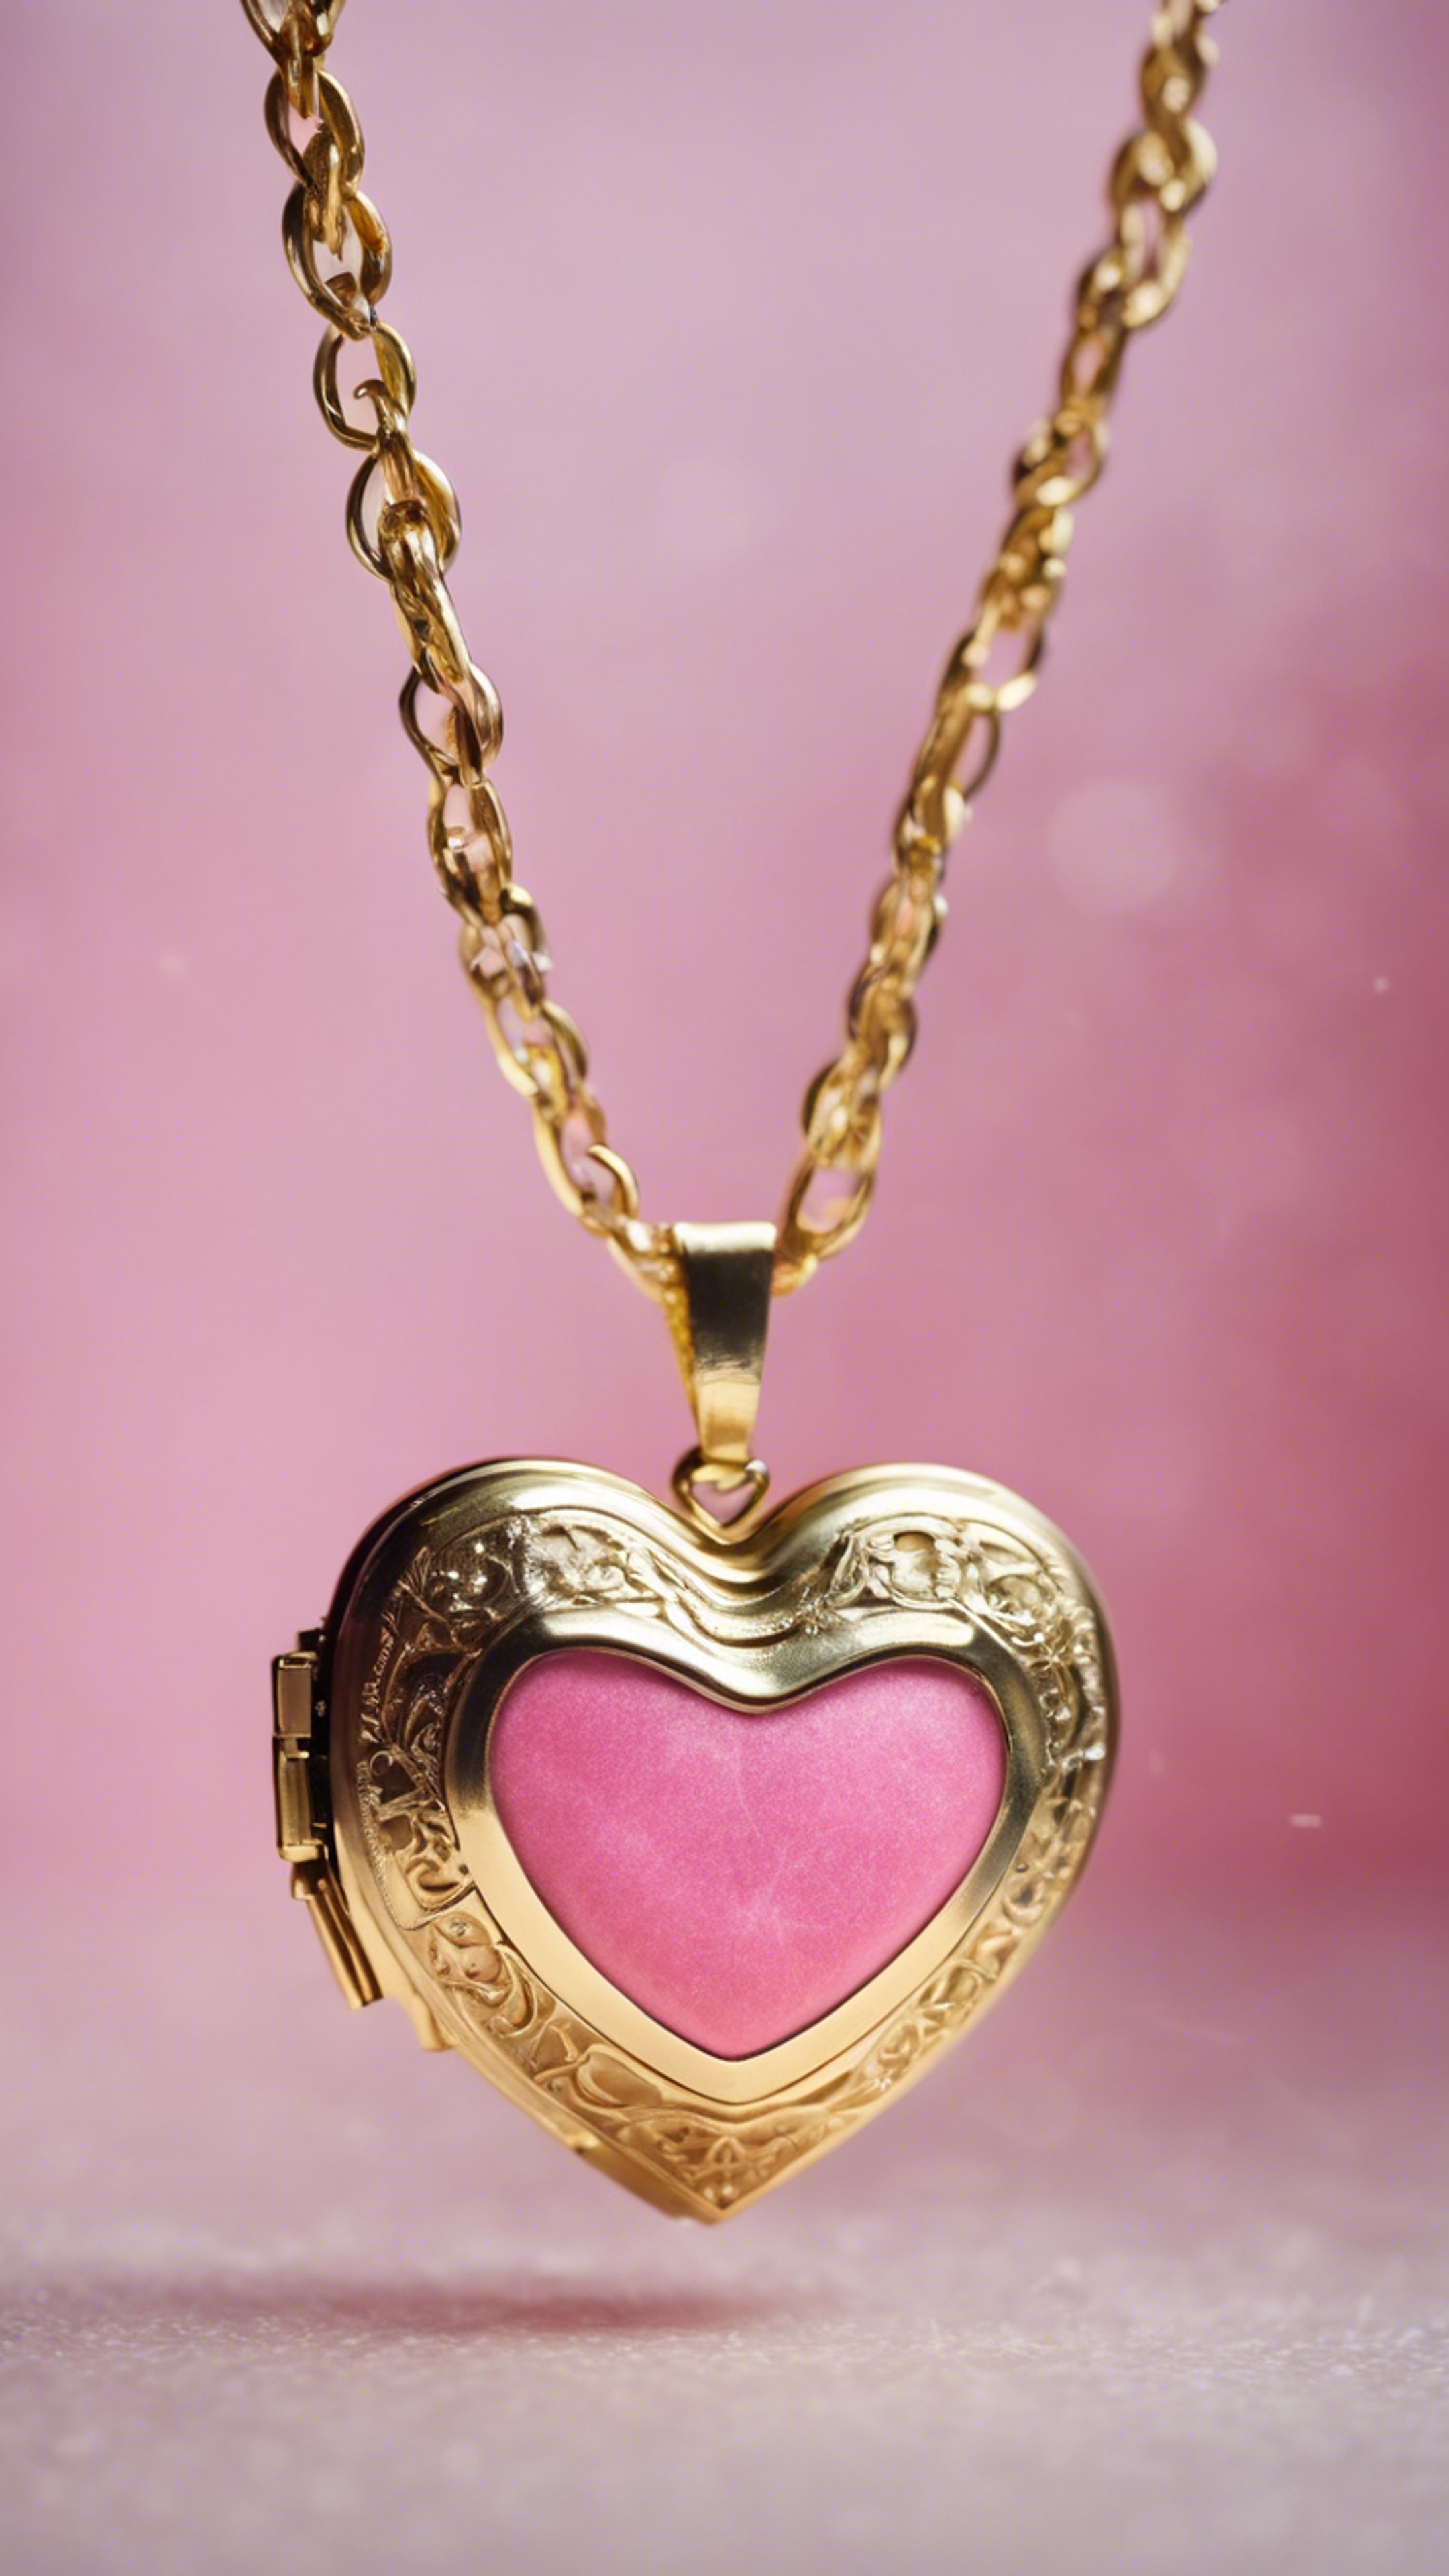 A pink heart shaped locket with a golden chain. Wallpaper[1bc2849041704351966a]